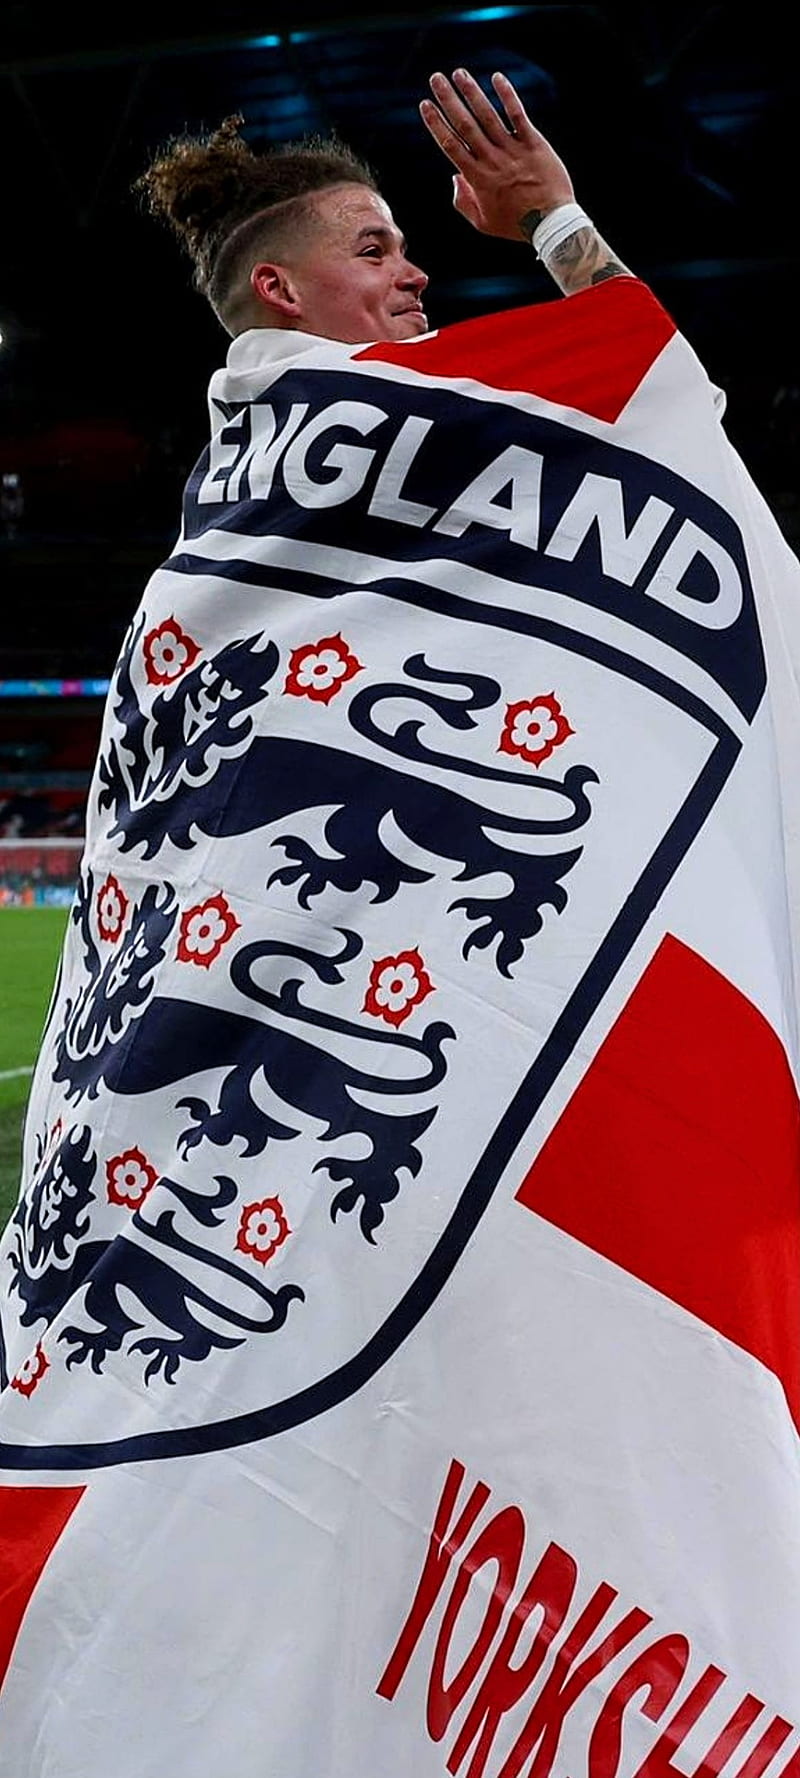 England PATRIOT, Leeds, Kevin Philips, England Flag, Its coming home, Euro, Leeds United, HD phone wallpaper